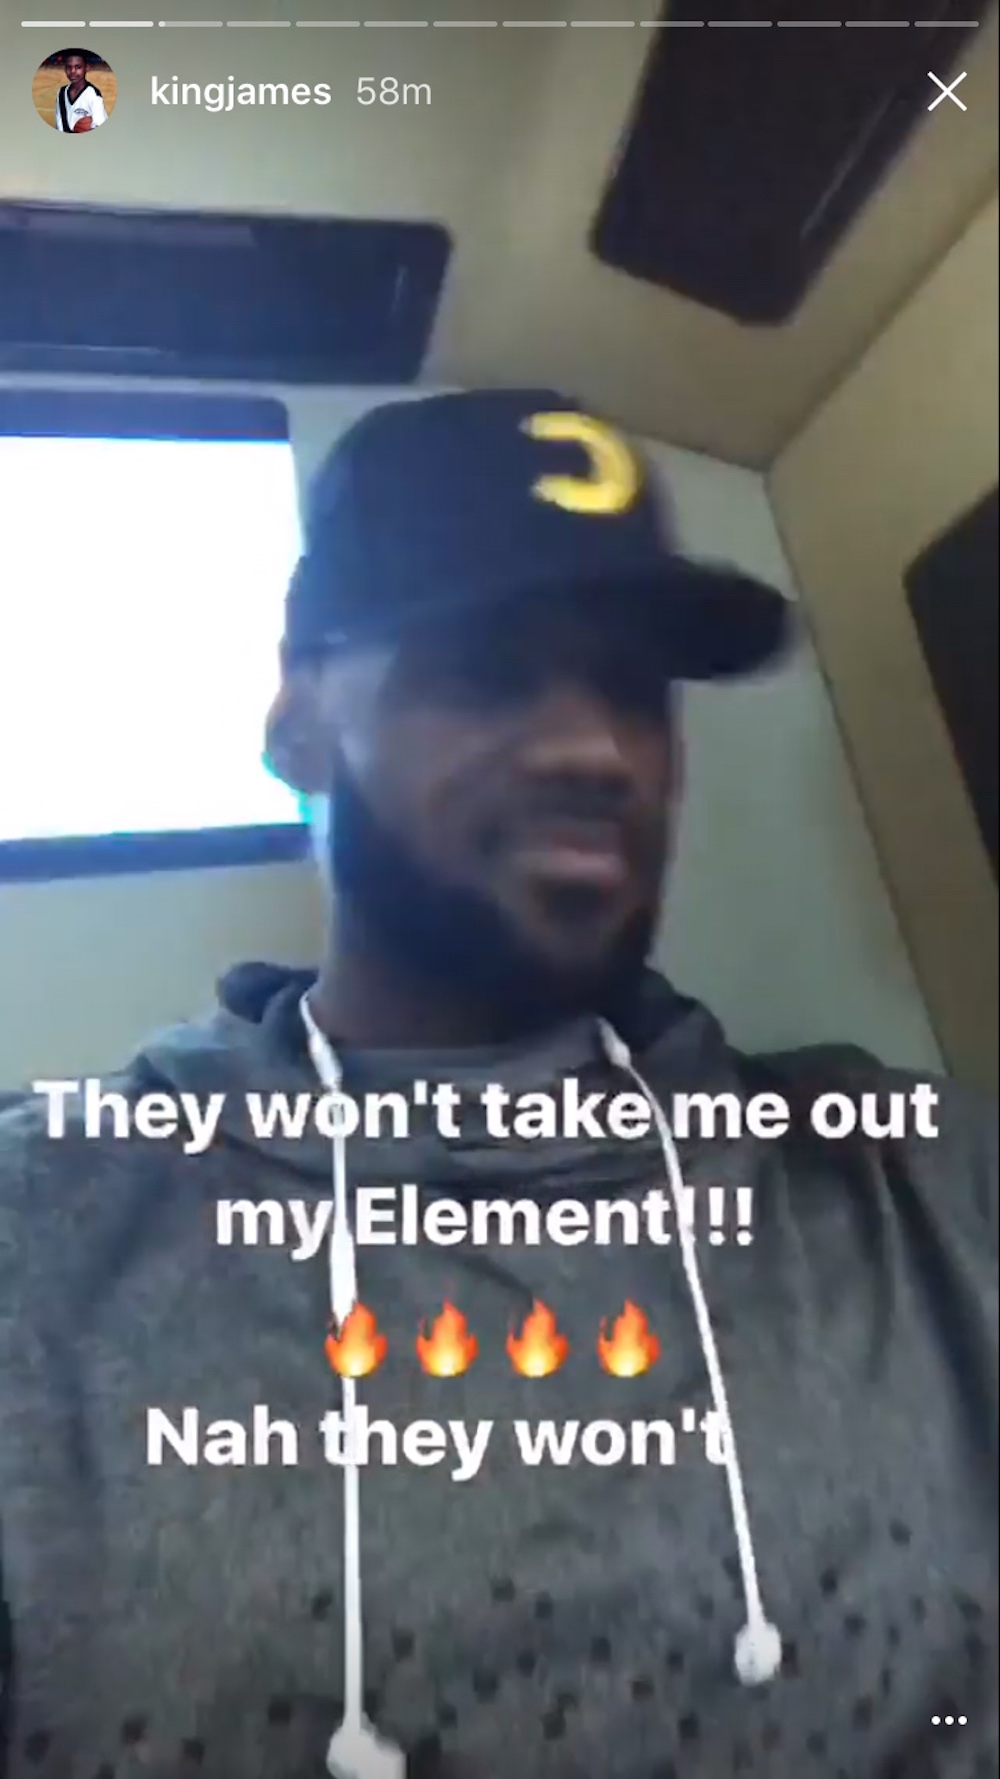 What We Learned About Kendrick Lamar's <i>DAMN.</i> From LeBron James’ Instagram” title=”element” data-original-id=”235168″ data-adjusted-id=”235168″ class=”sm_size_full_width sm_alignment_center ” />
<p><strong>“FEEL.” seems like another introspective Lamar joint.</strong></p>
<p>Like <em>TPAB</em>‘s “u,” “FEEL.” could be another stream-of-consciousness piece where Lamar confronts his anxieties. It sounds like a bleak piece of introspection with Lamar brooding “I feel like the world ending and fuck you if you get offended.” The rhyme scheme centers around the song’s title and features a subdued, melancholic groove. “FEEL.” is also produced by frequent collaborator Sounwave.</p>
<img src=